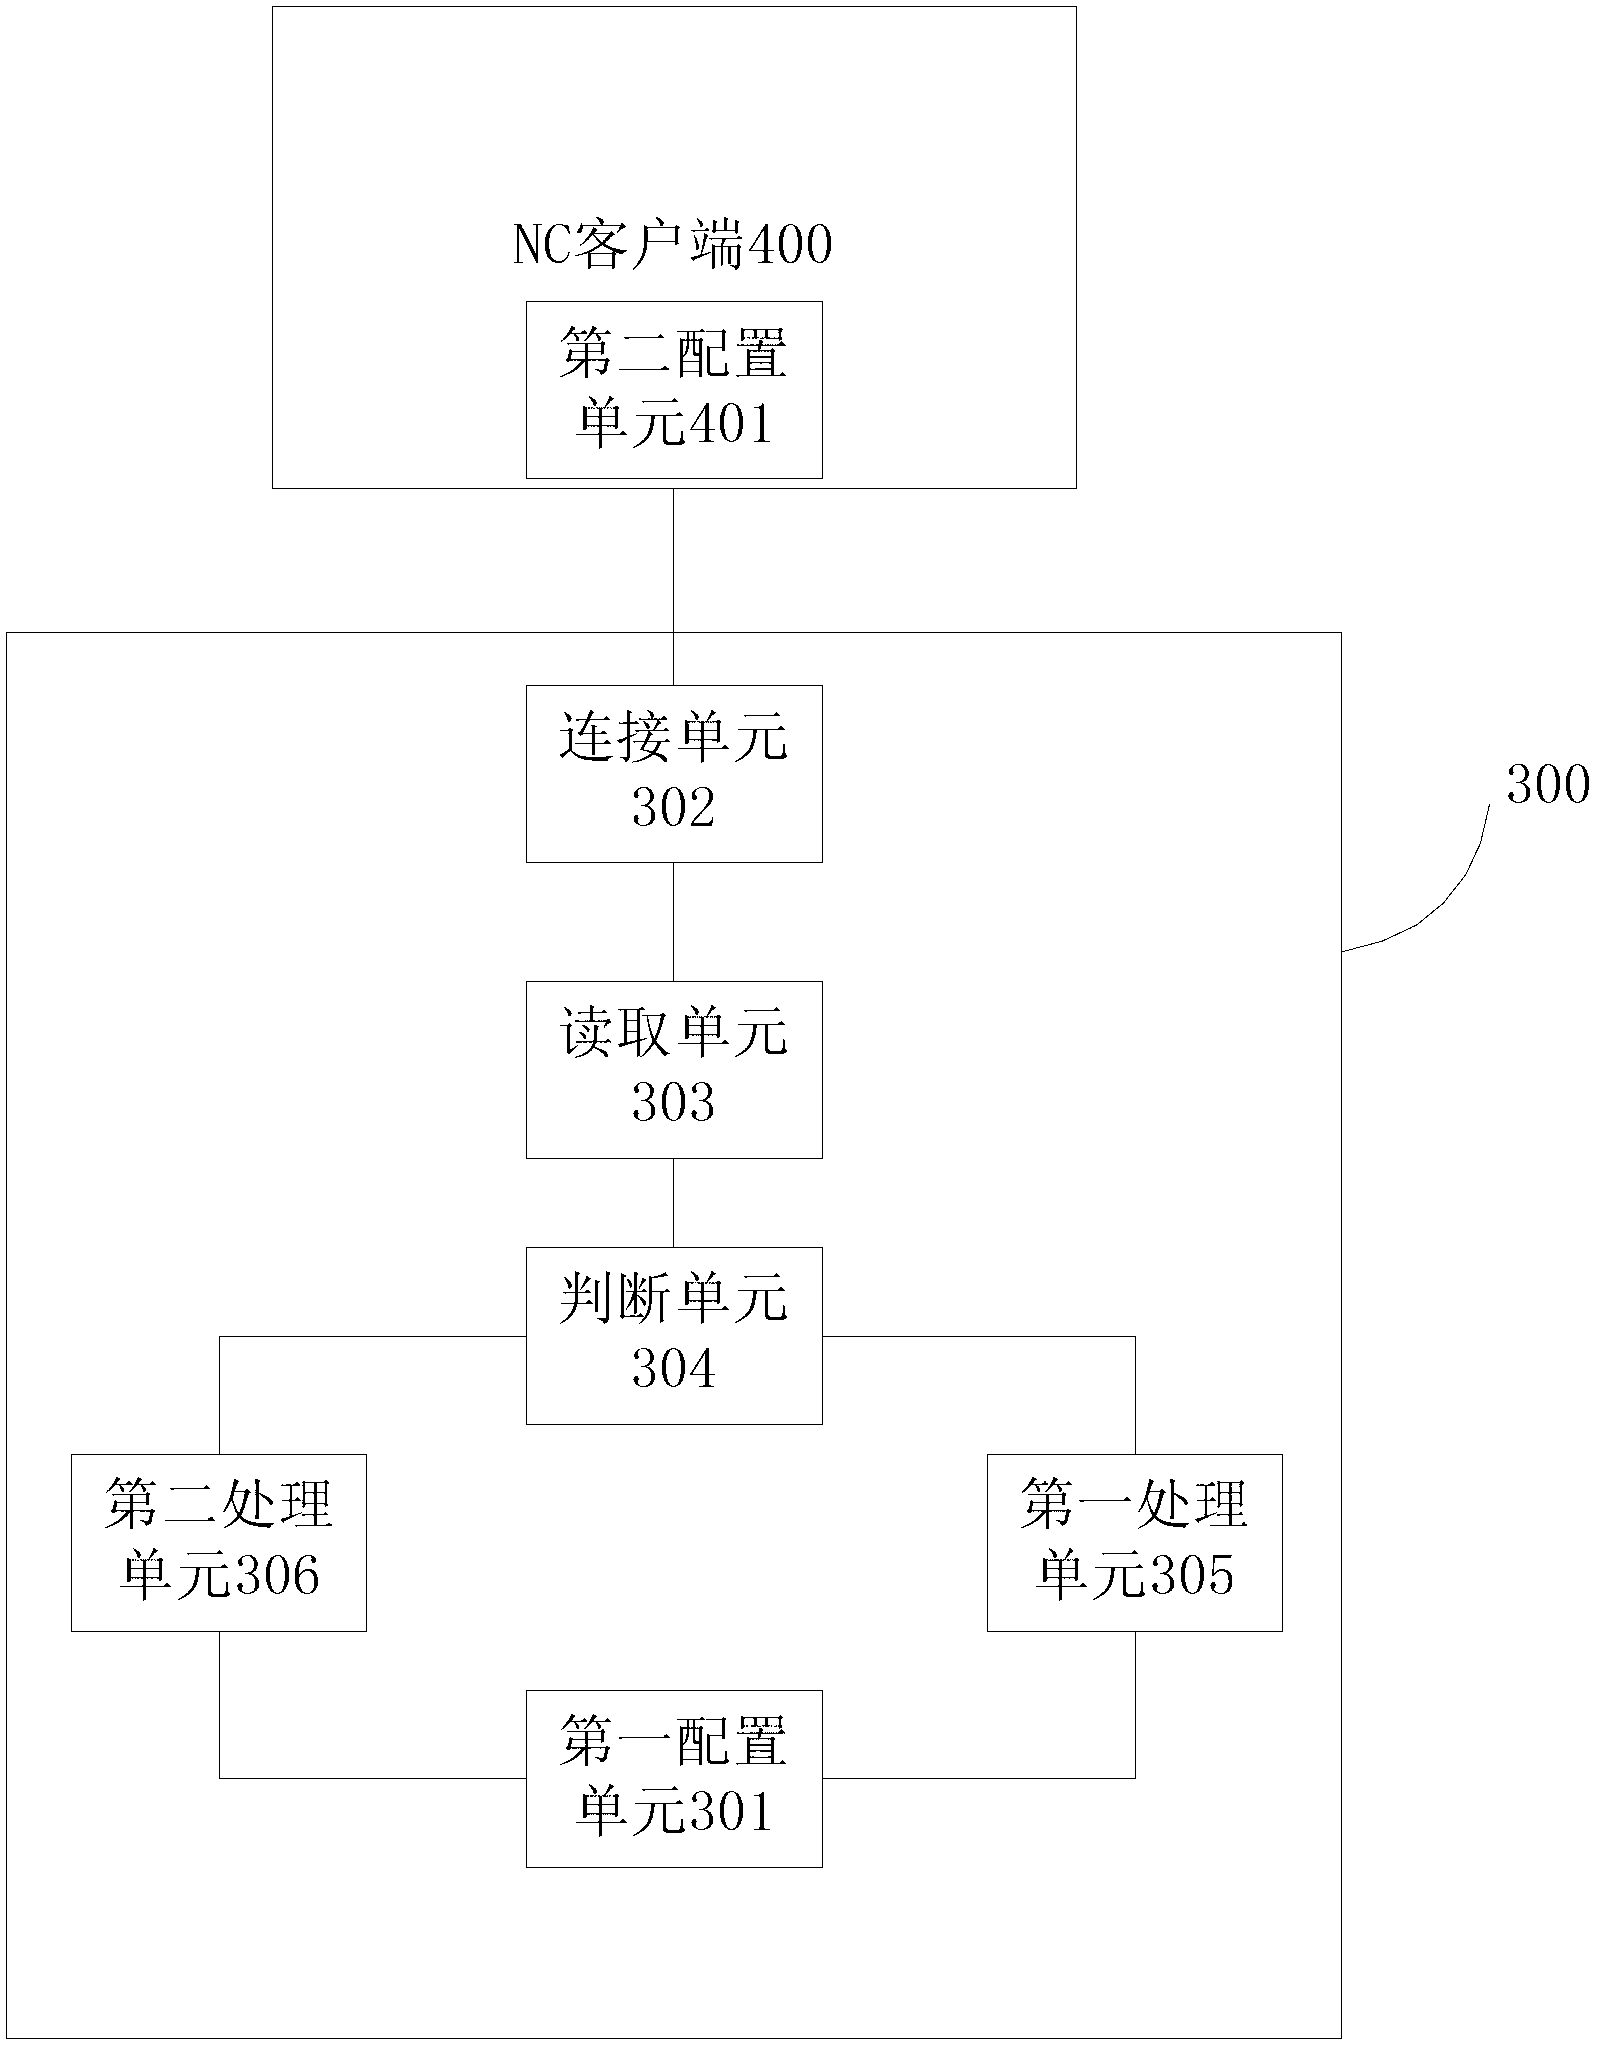 Method and device for automatically configuring and managing equipment